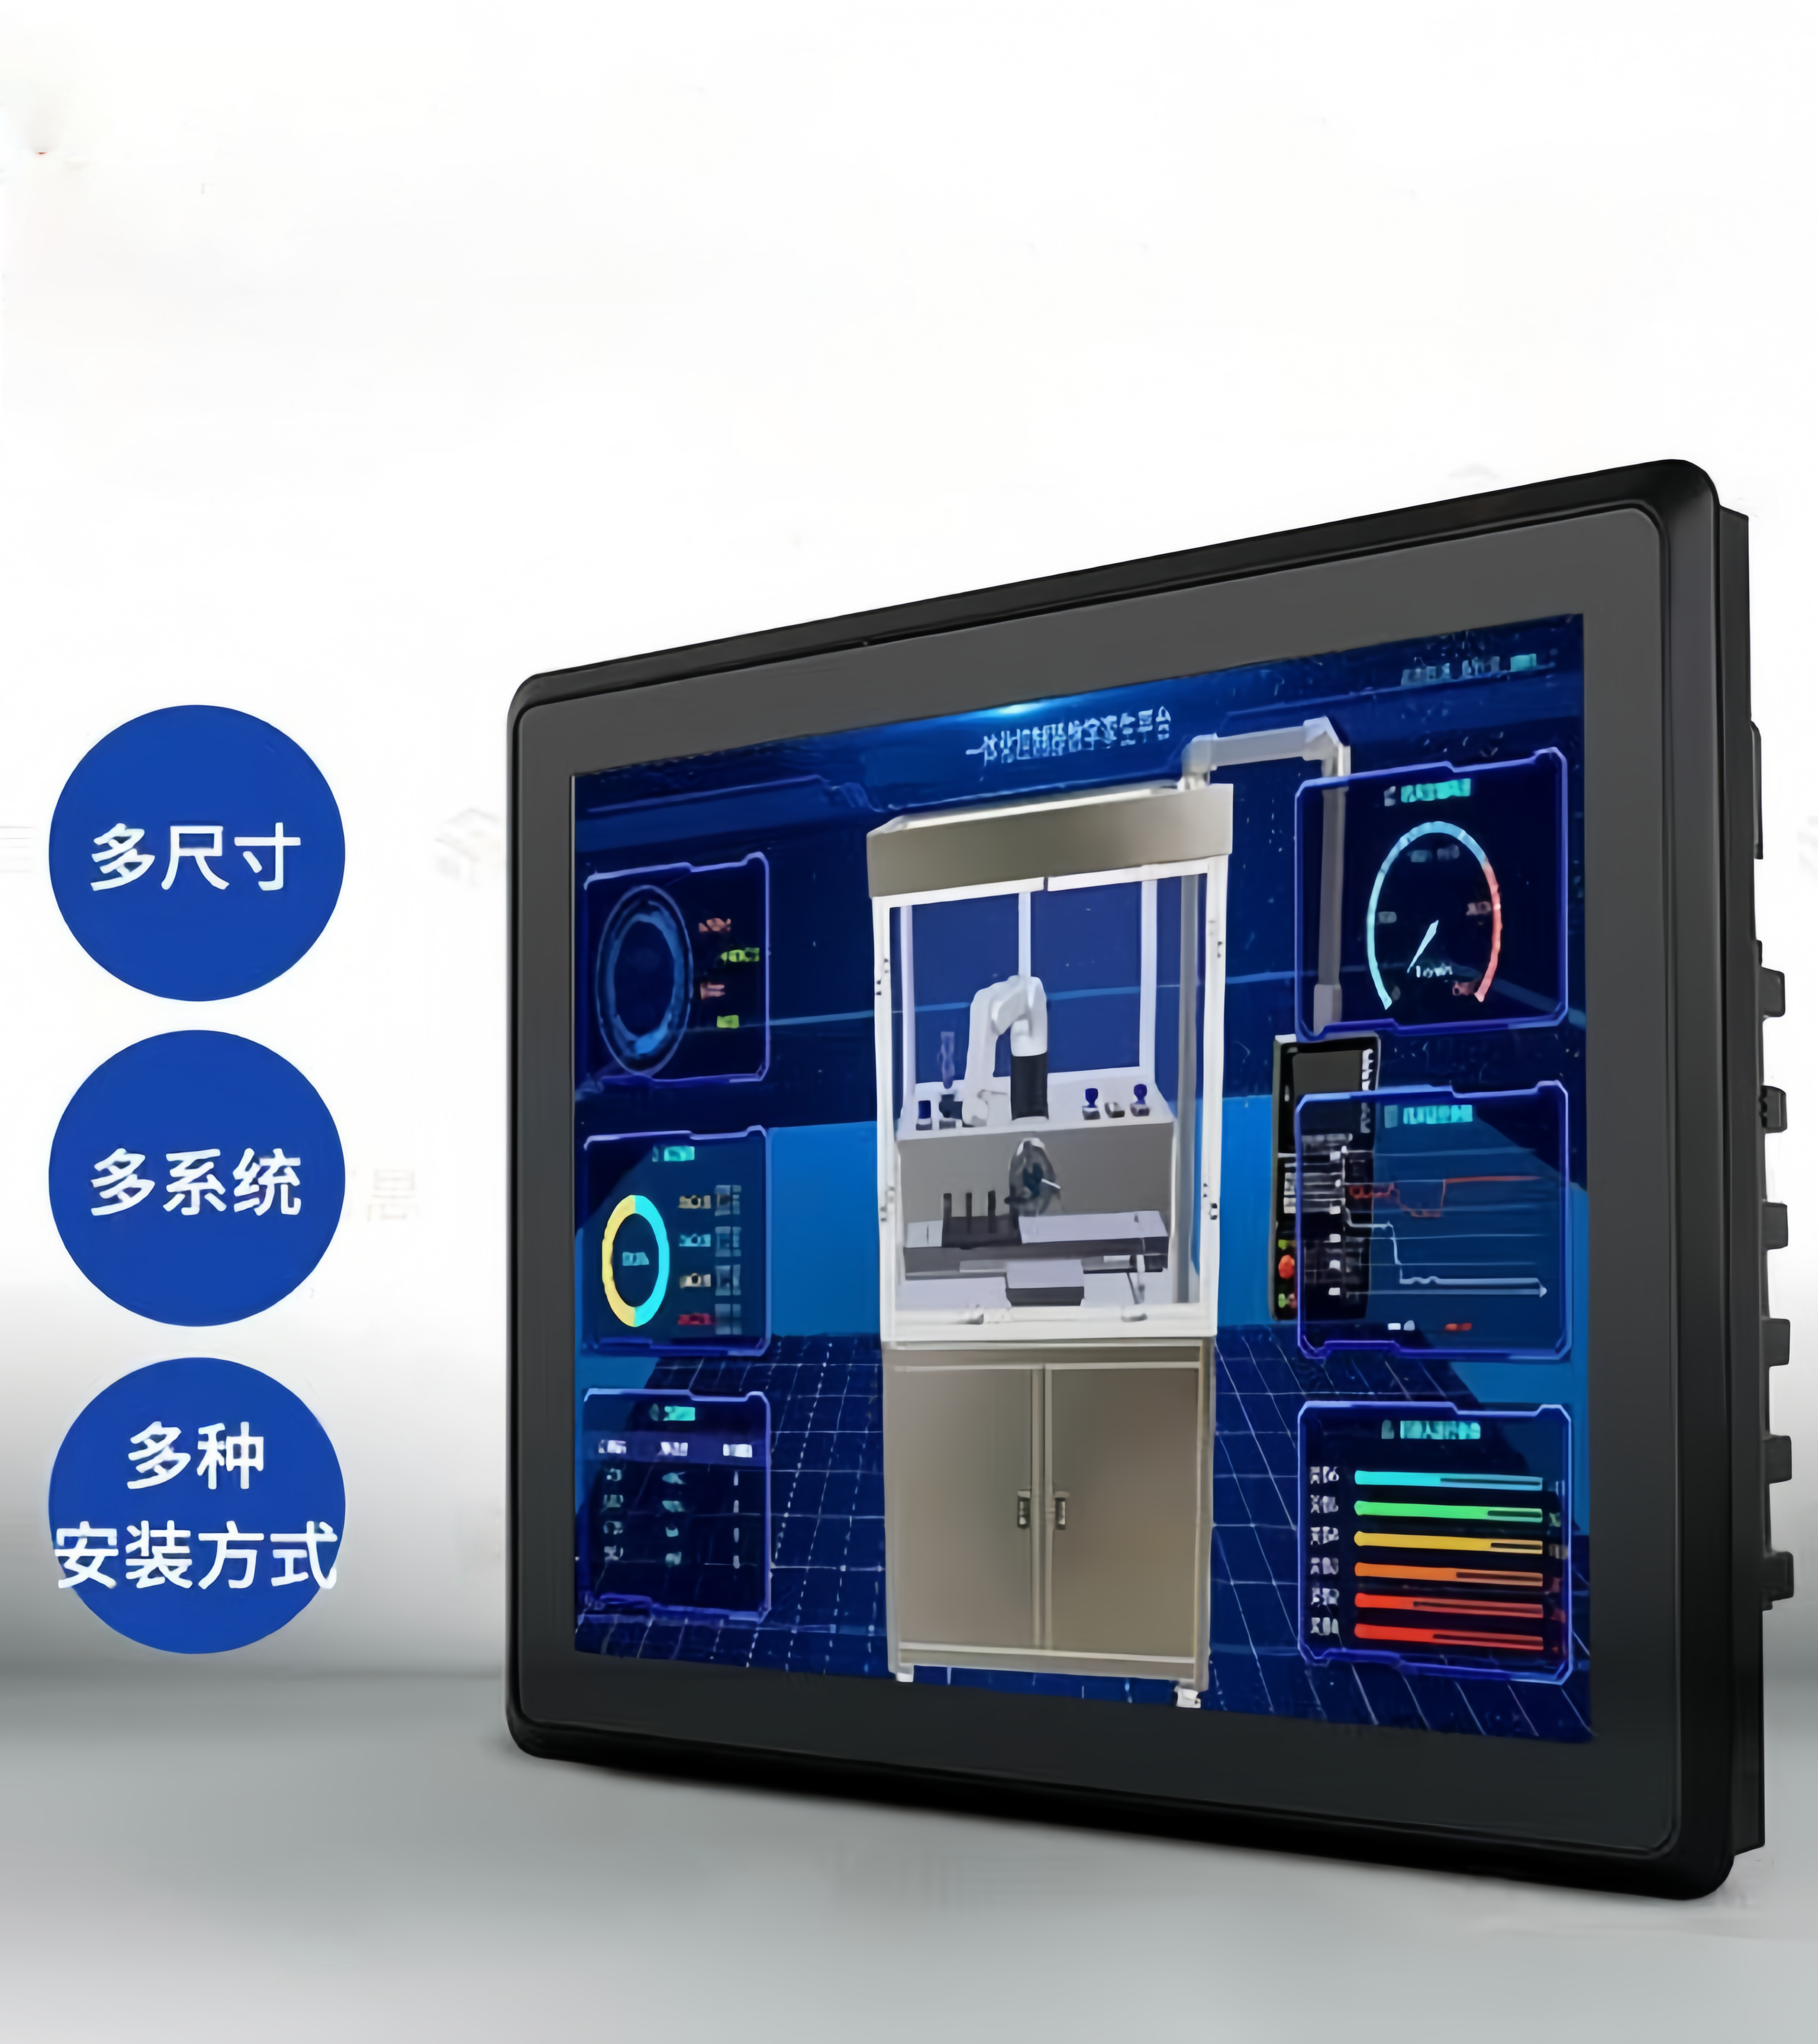 Driven by Industry 4.0, the industrial display market is booming